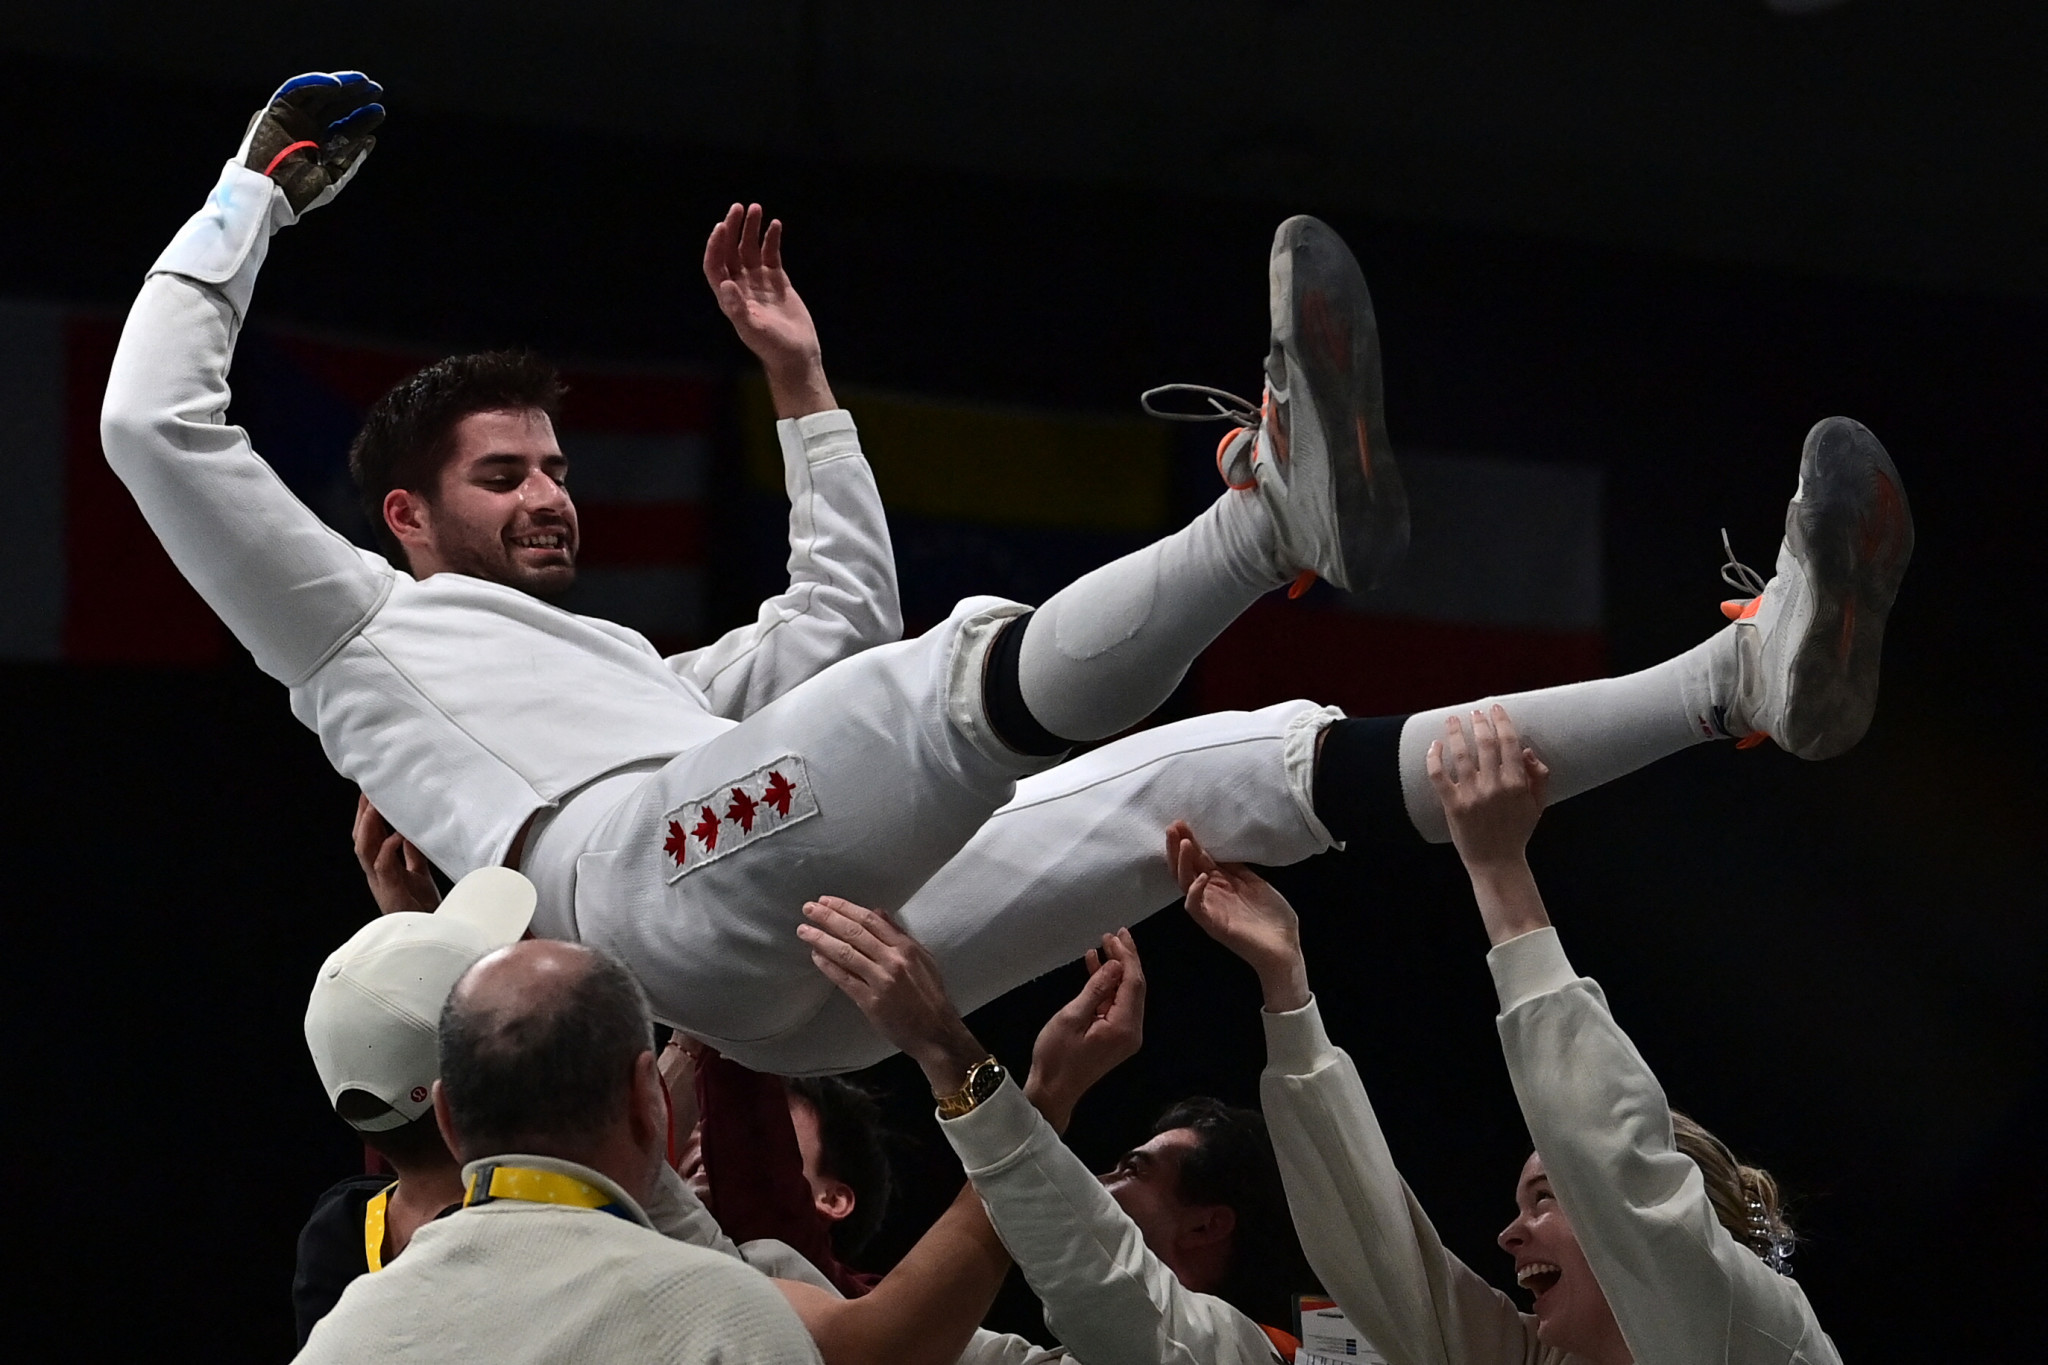 
Canada got their fencing title thanks to Dylan French coming out on top 15-12 against Chile's Pablo Nuñez in the men's épée ©Getty Images
